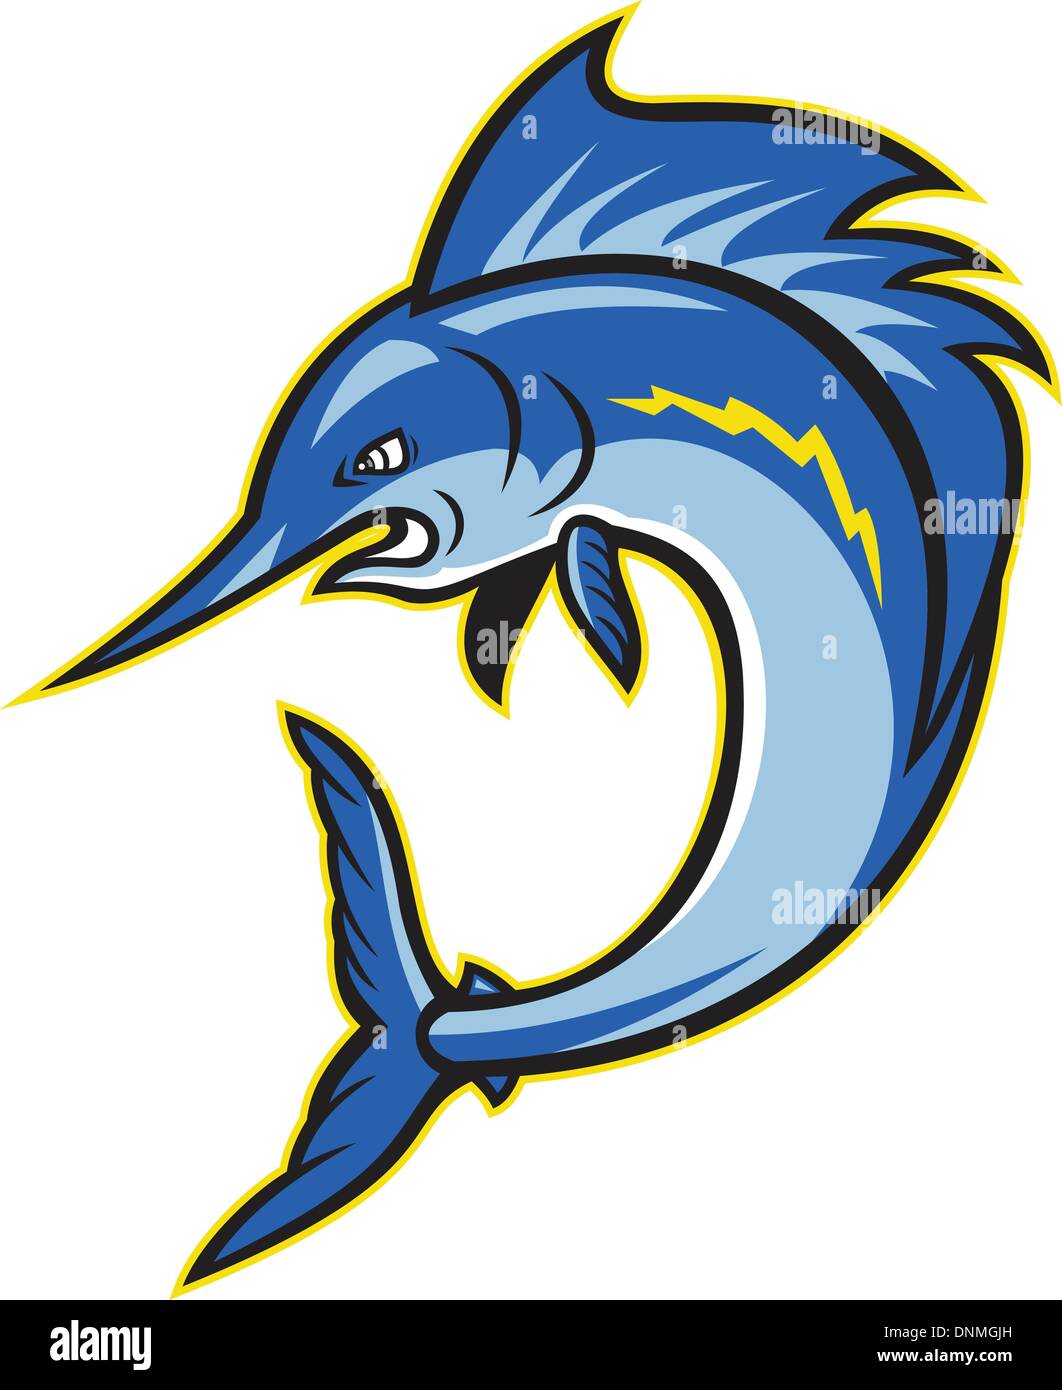 Cartoon illustration of a sailfish swordfish jumping viewed from side on isolated white background. Stock Vector